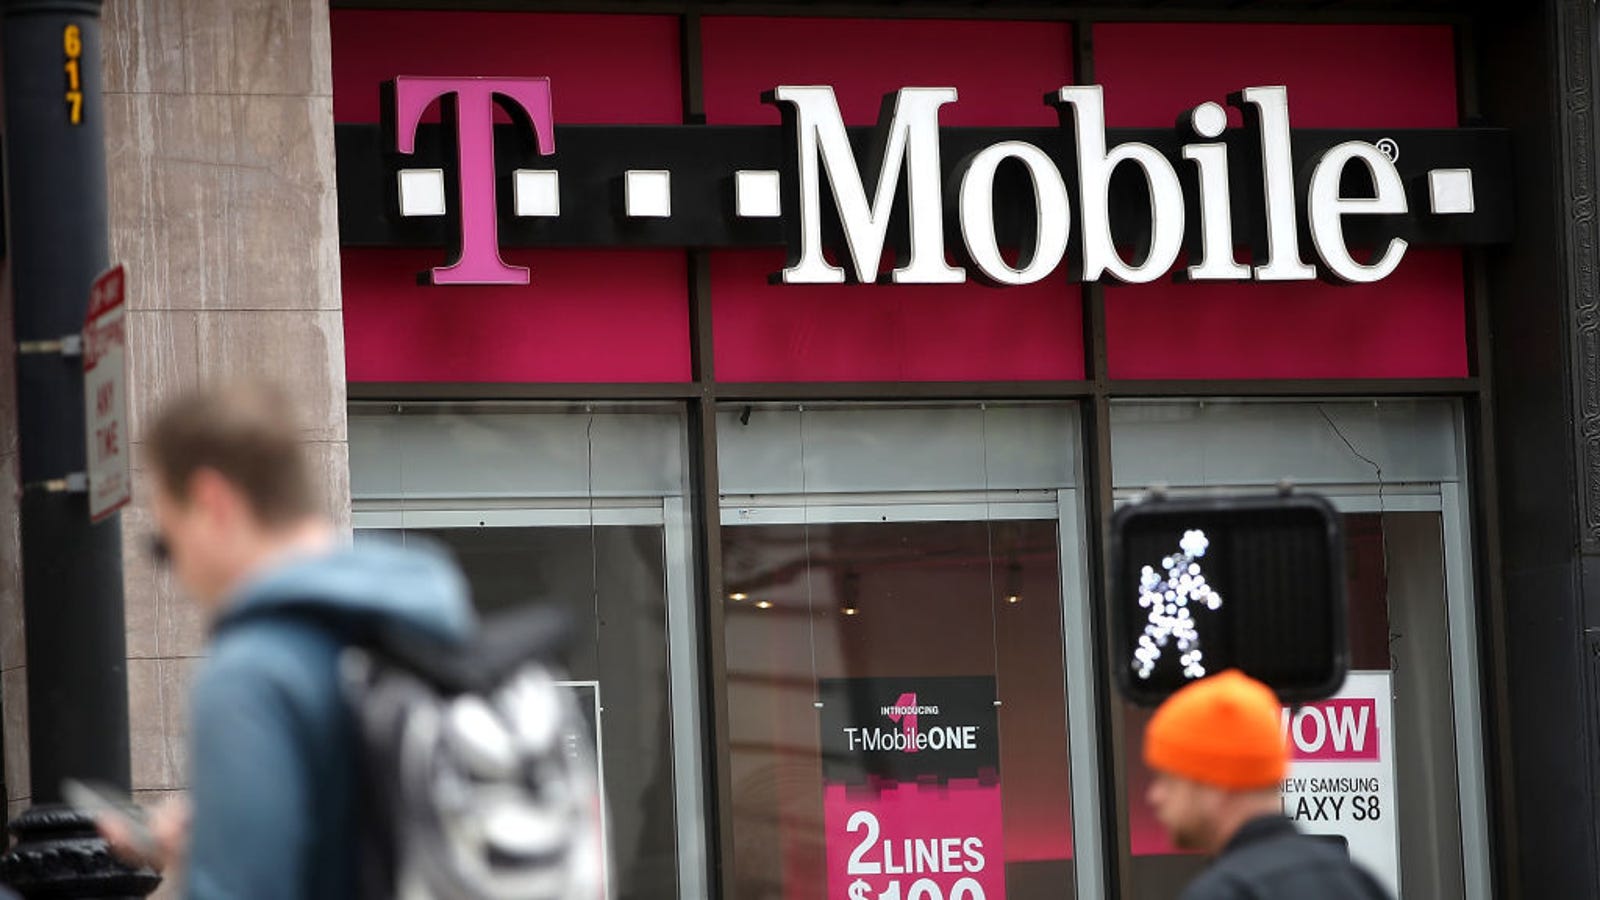 Did TMobile Austria Really Just Admit It Stores Customer Passwords in